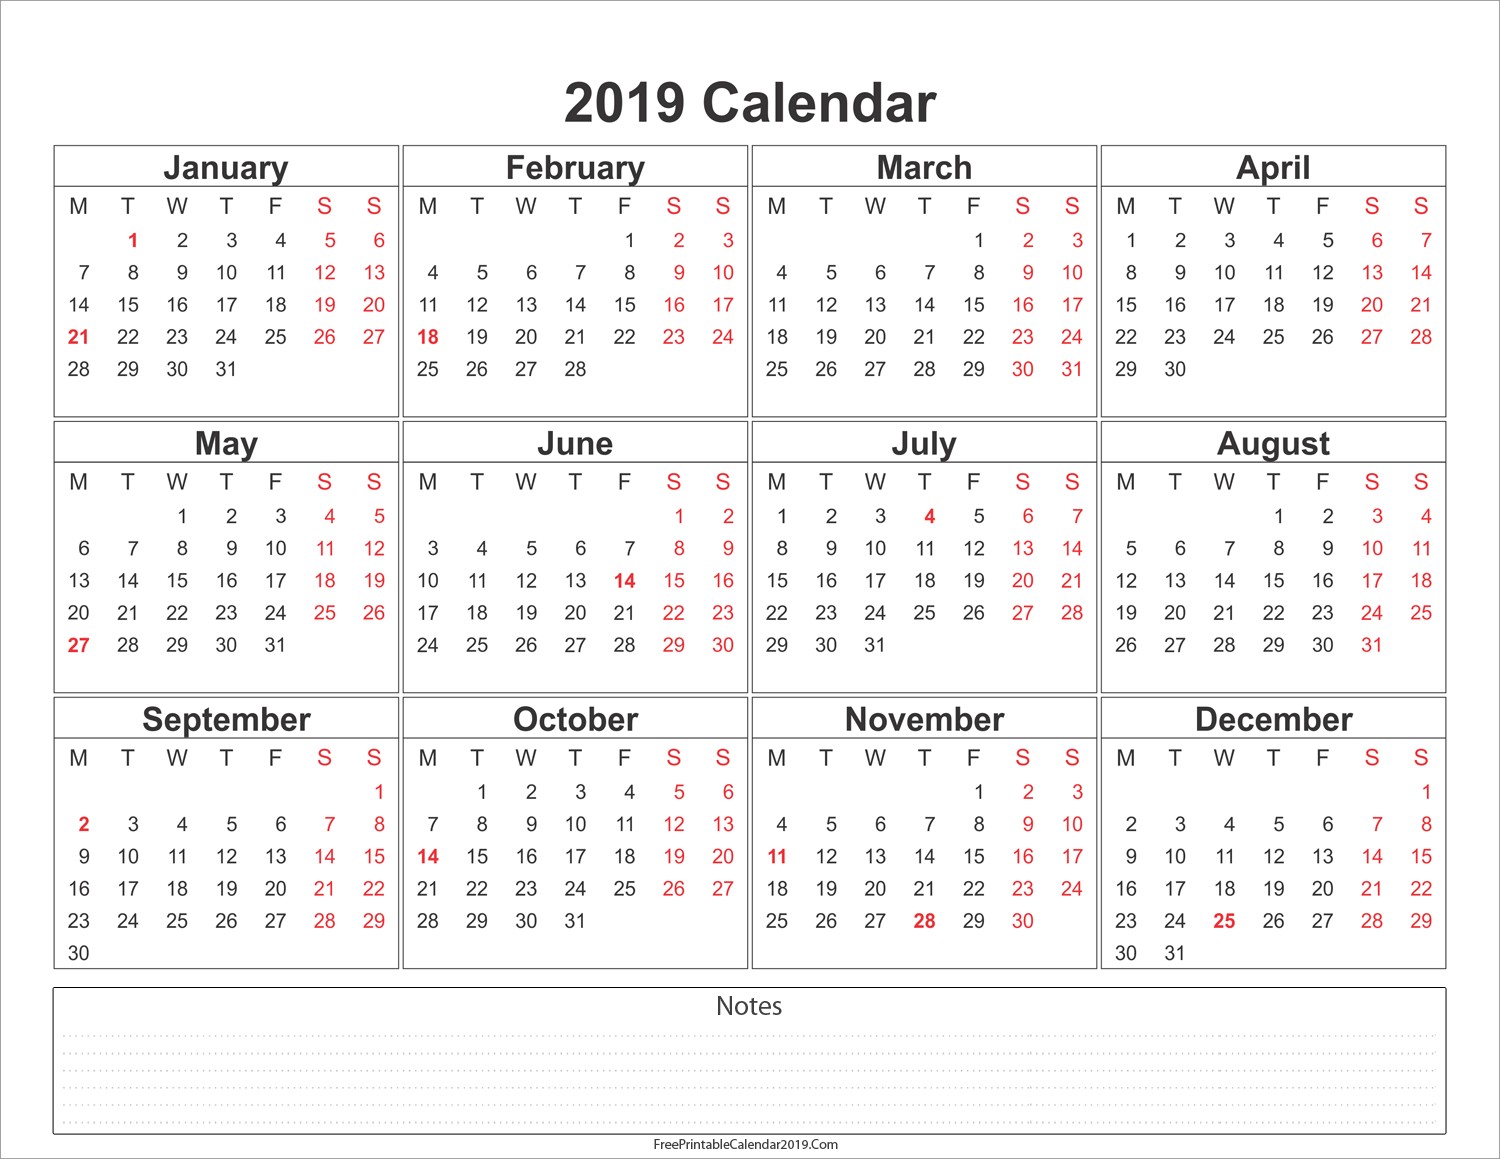 Calendar 2019 and 2019 Printable Free Printable Calendar 2019 with Holidays In Word Excel Pdf